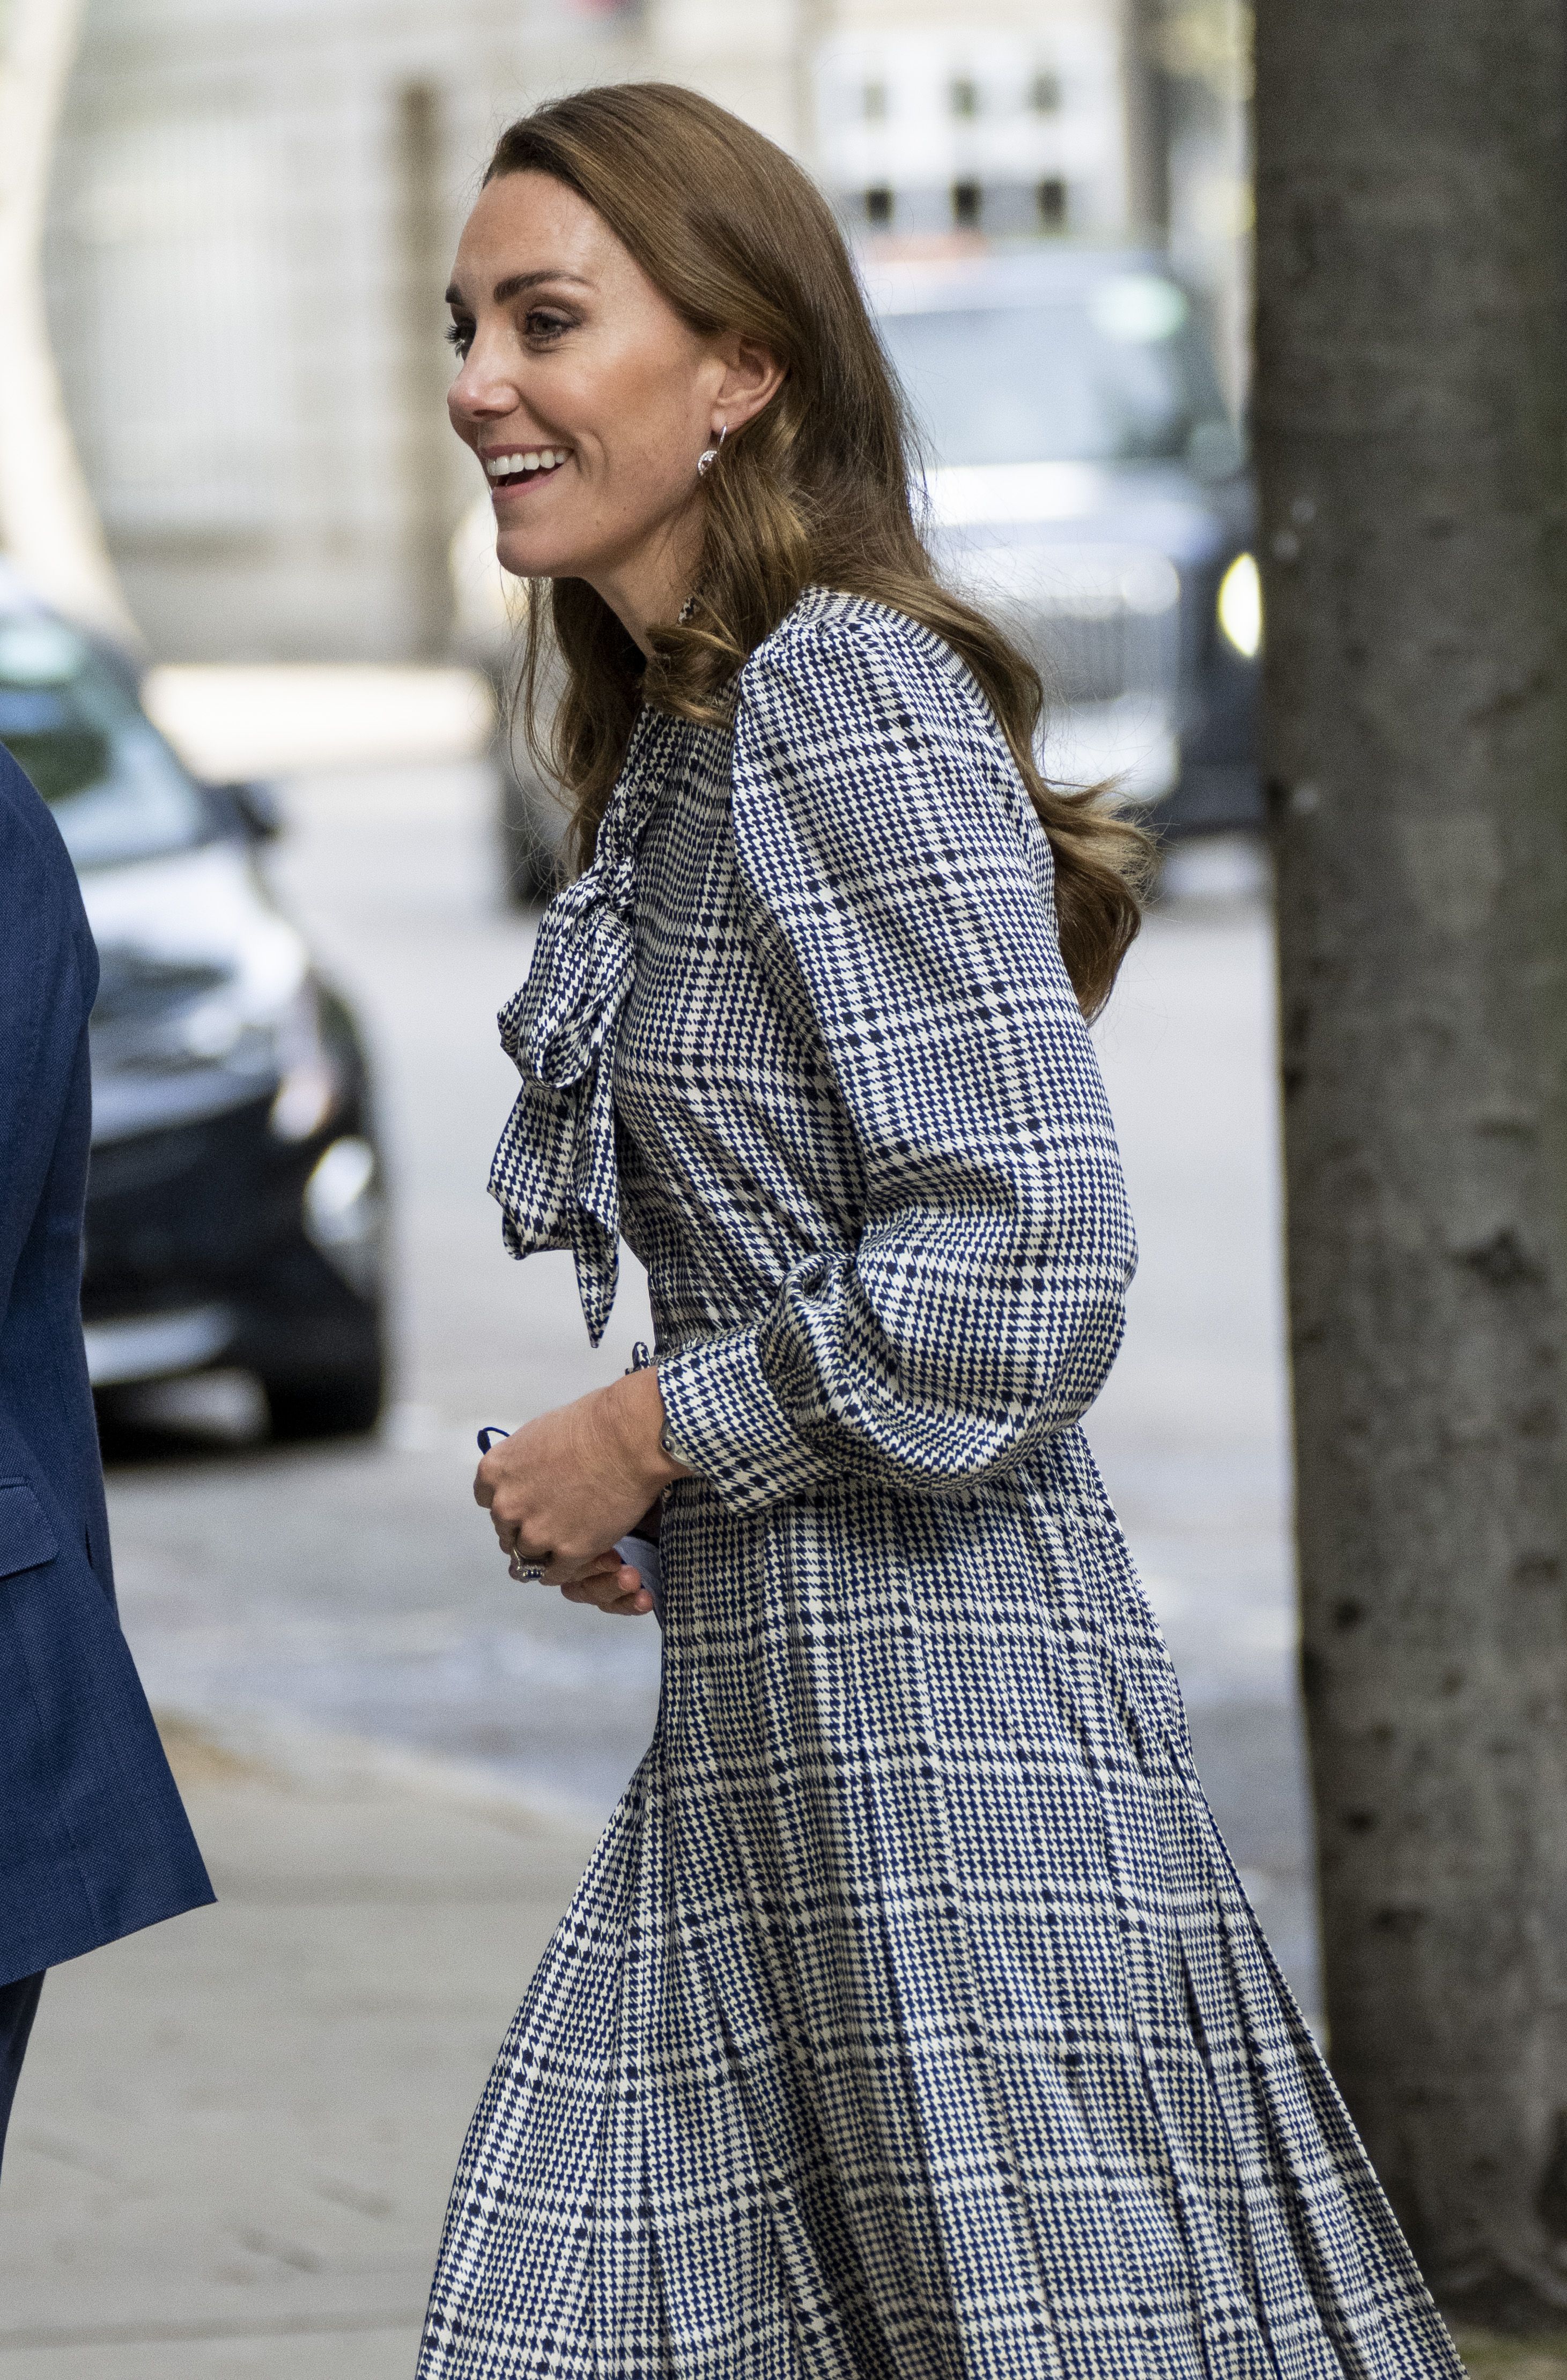 Photos of Kate Middleton Wearing Clothes From Zara